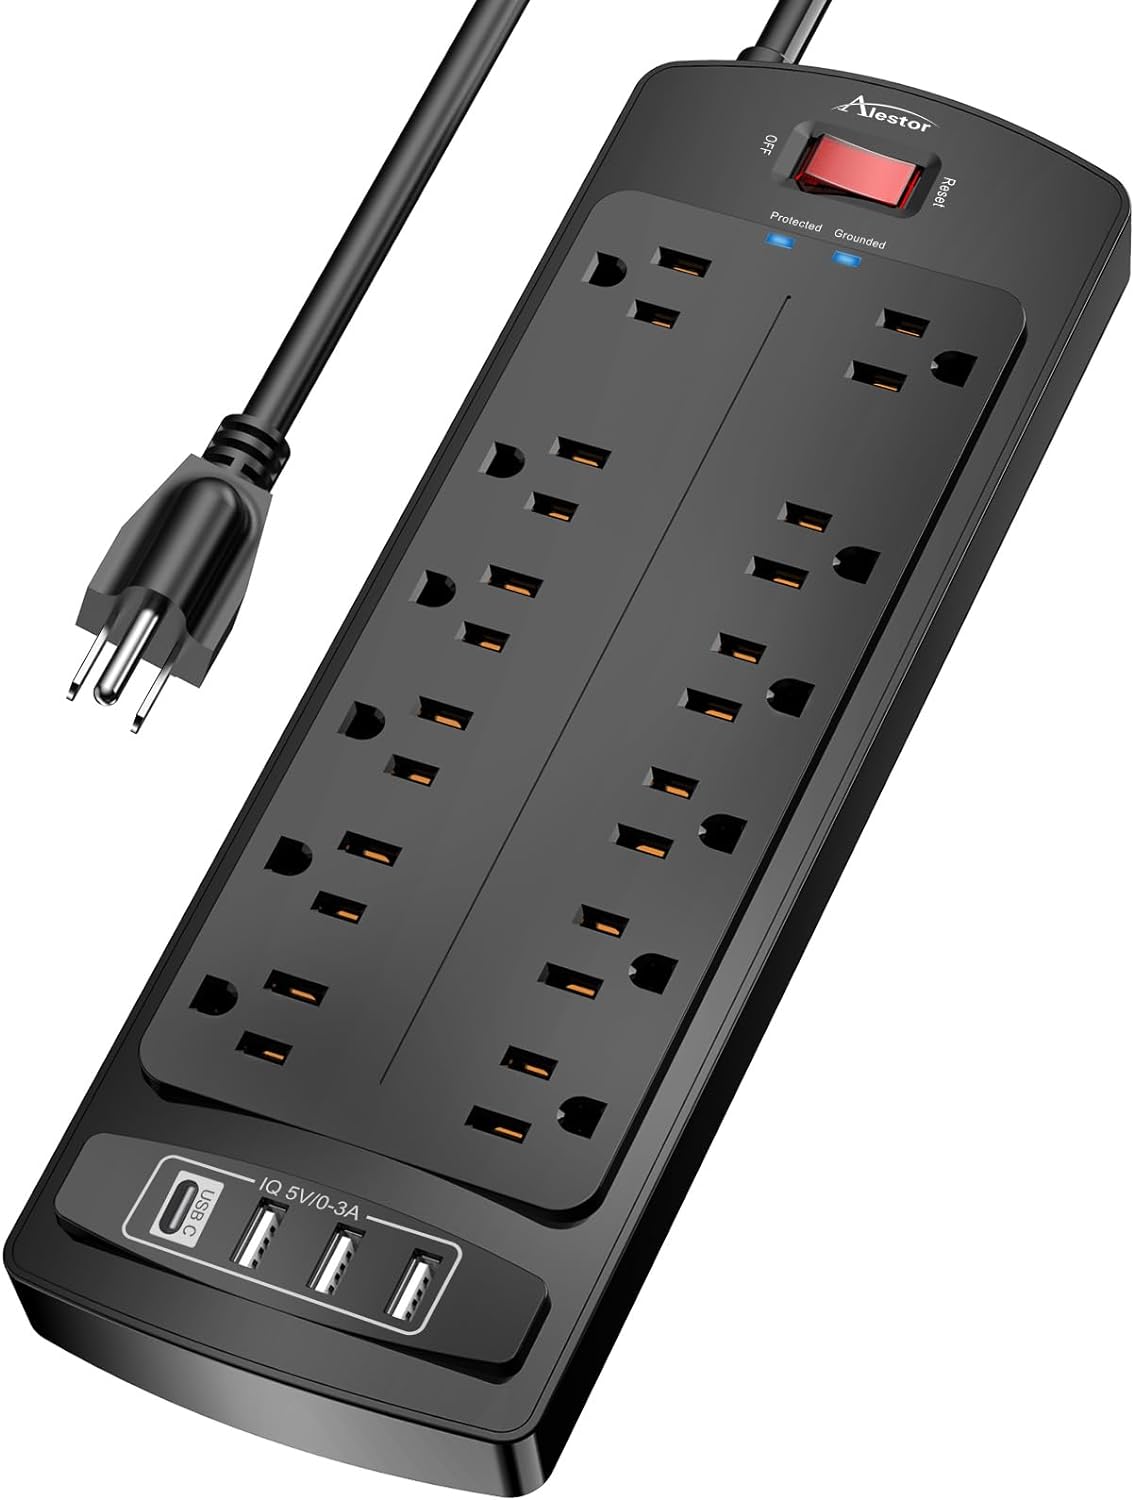 Power Strip Surge Protector - ALESTOR 10 Feet Extension Cord (1875W/15A) with 12 Outlets and 4 USB Ports, 2700 Joules, for Home, School, College Dorm Room, and Office, ETL Listed, Black